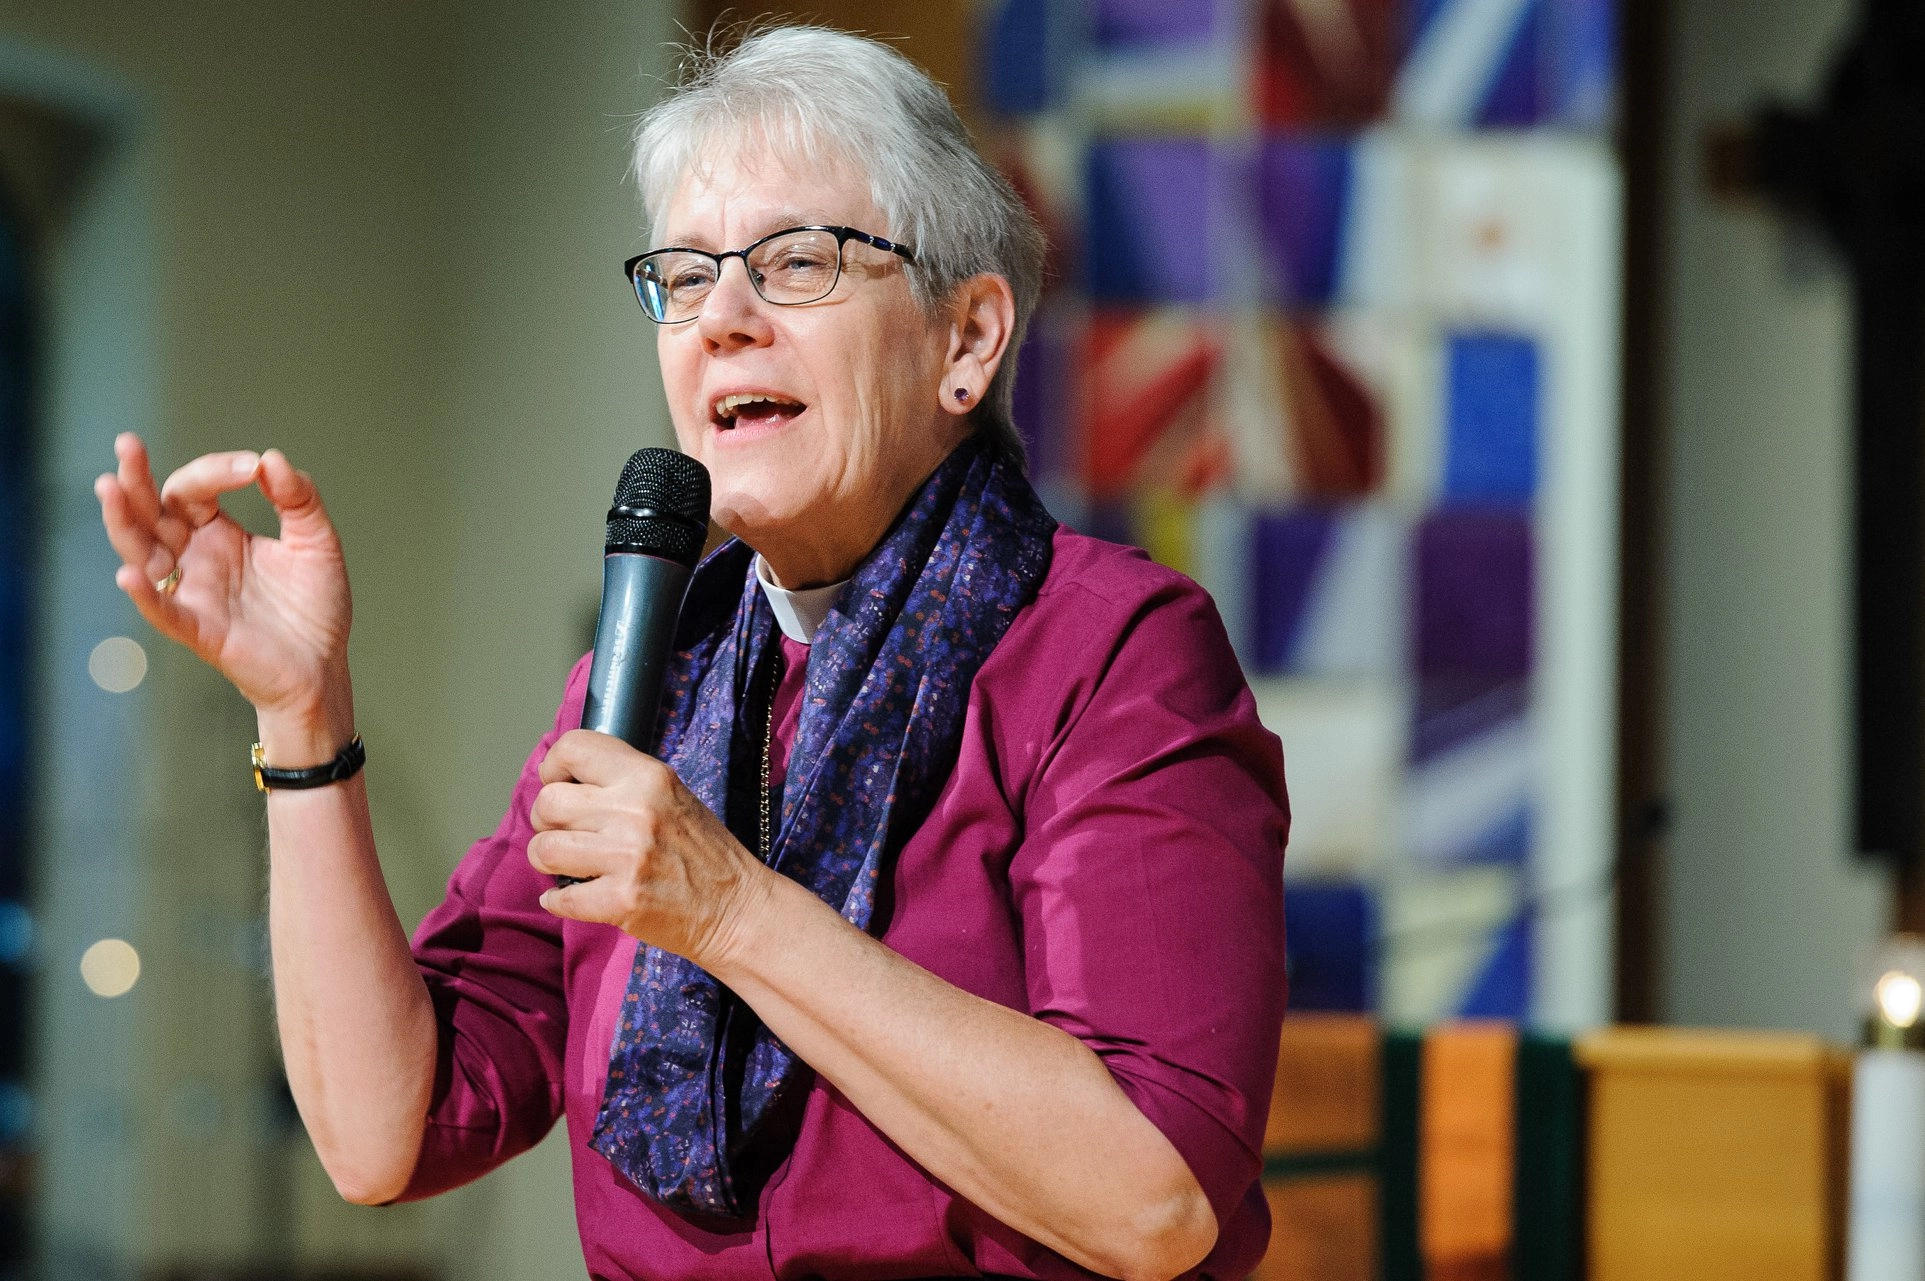 Bishop Linda Nicholls of the Diocese of Huron was elected as the Primate of the Anglican Church of Canada at the General Synod in Vancouver